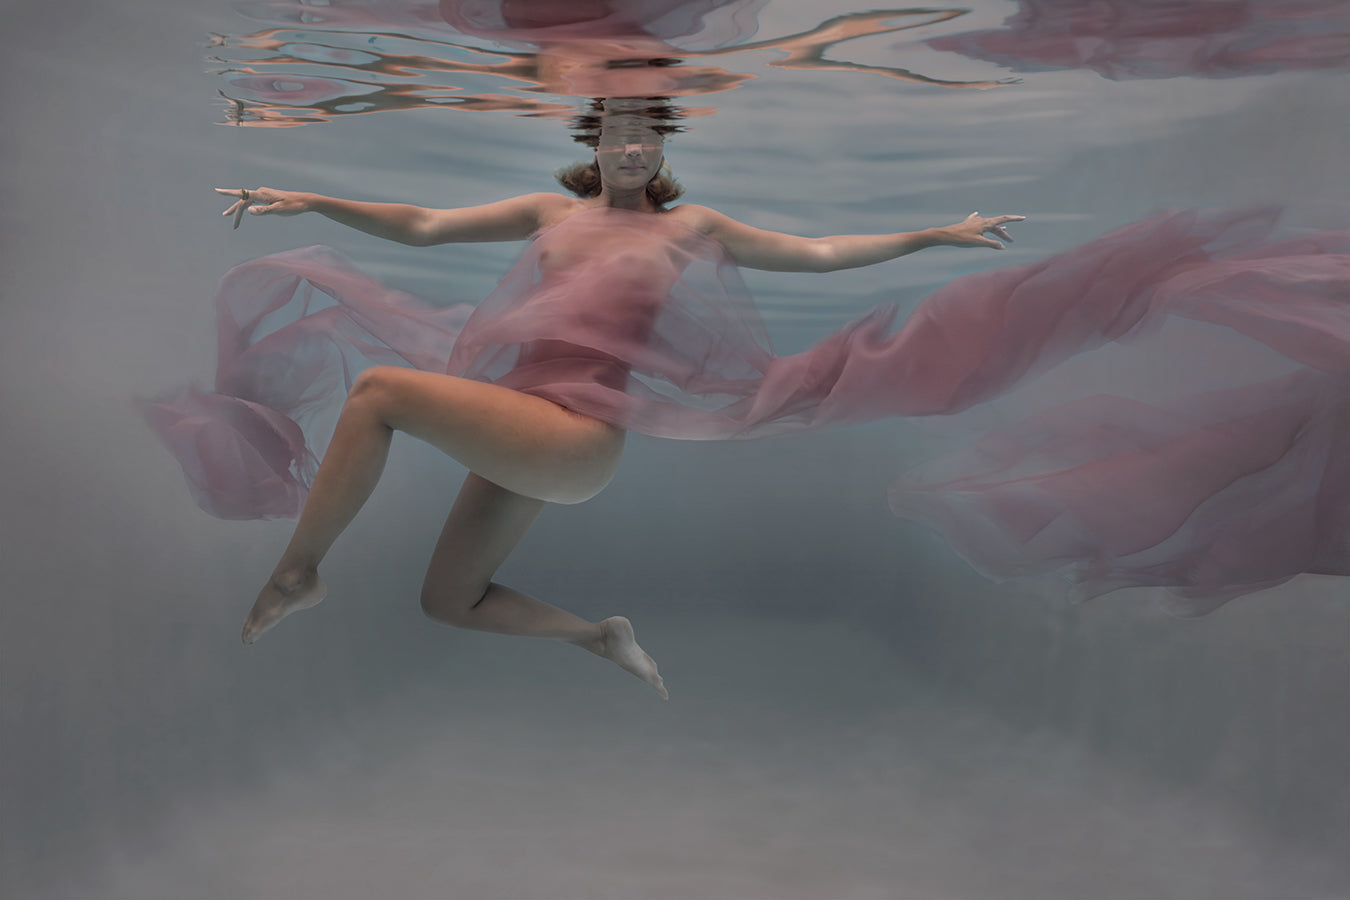 Within the depths of the sea, a stunning  figure, wrapped in sheer pink chifon, floats gracefully amidst the aquatic realm. Her ethereal beauty and serene presence are accentuated by the play of light and shadow in the fine art photography. The mysterious allure of the underwater world surrounds her, evoking a sense of enchantment and tranquility."